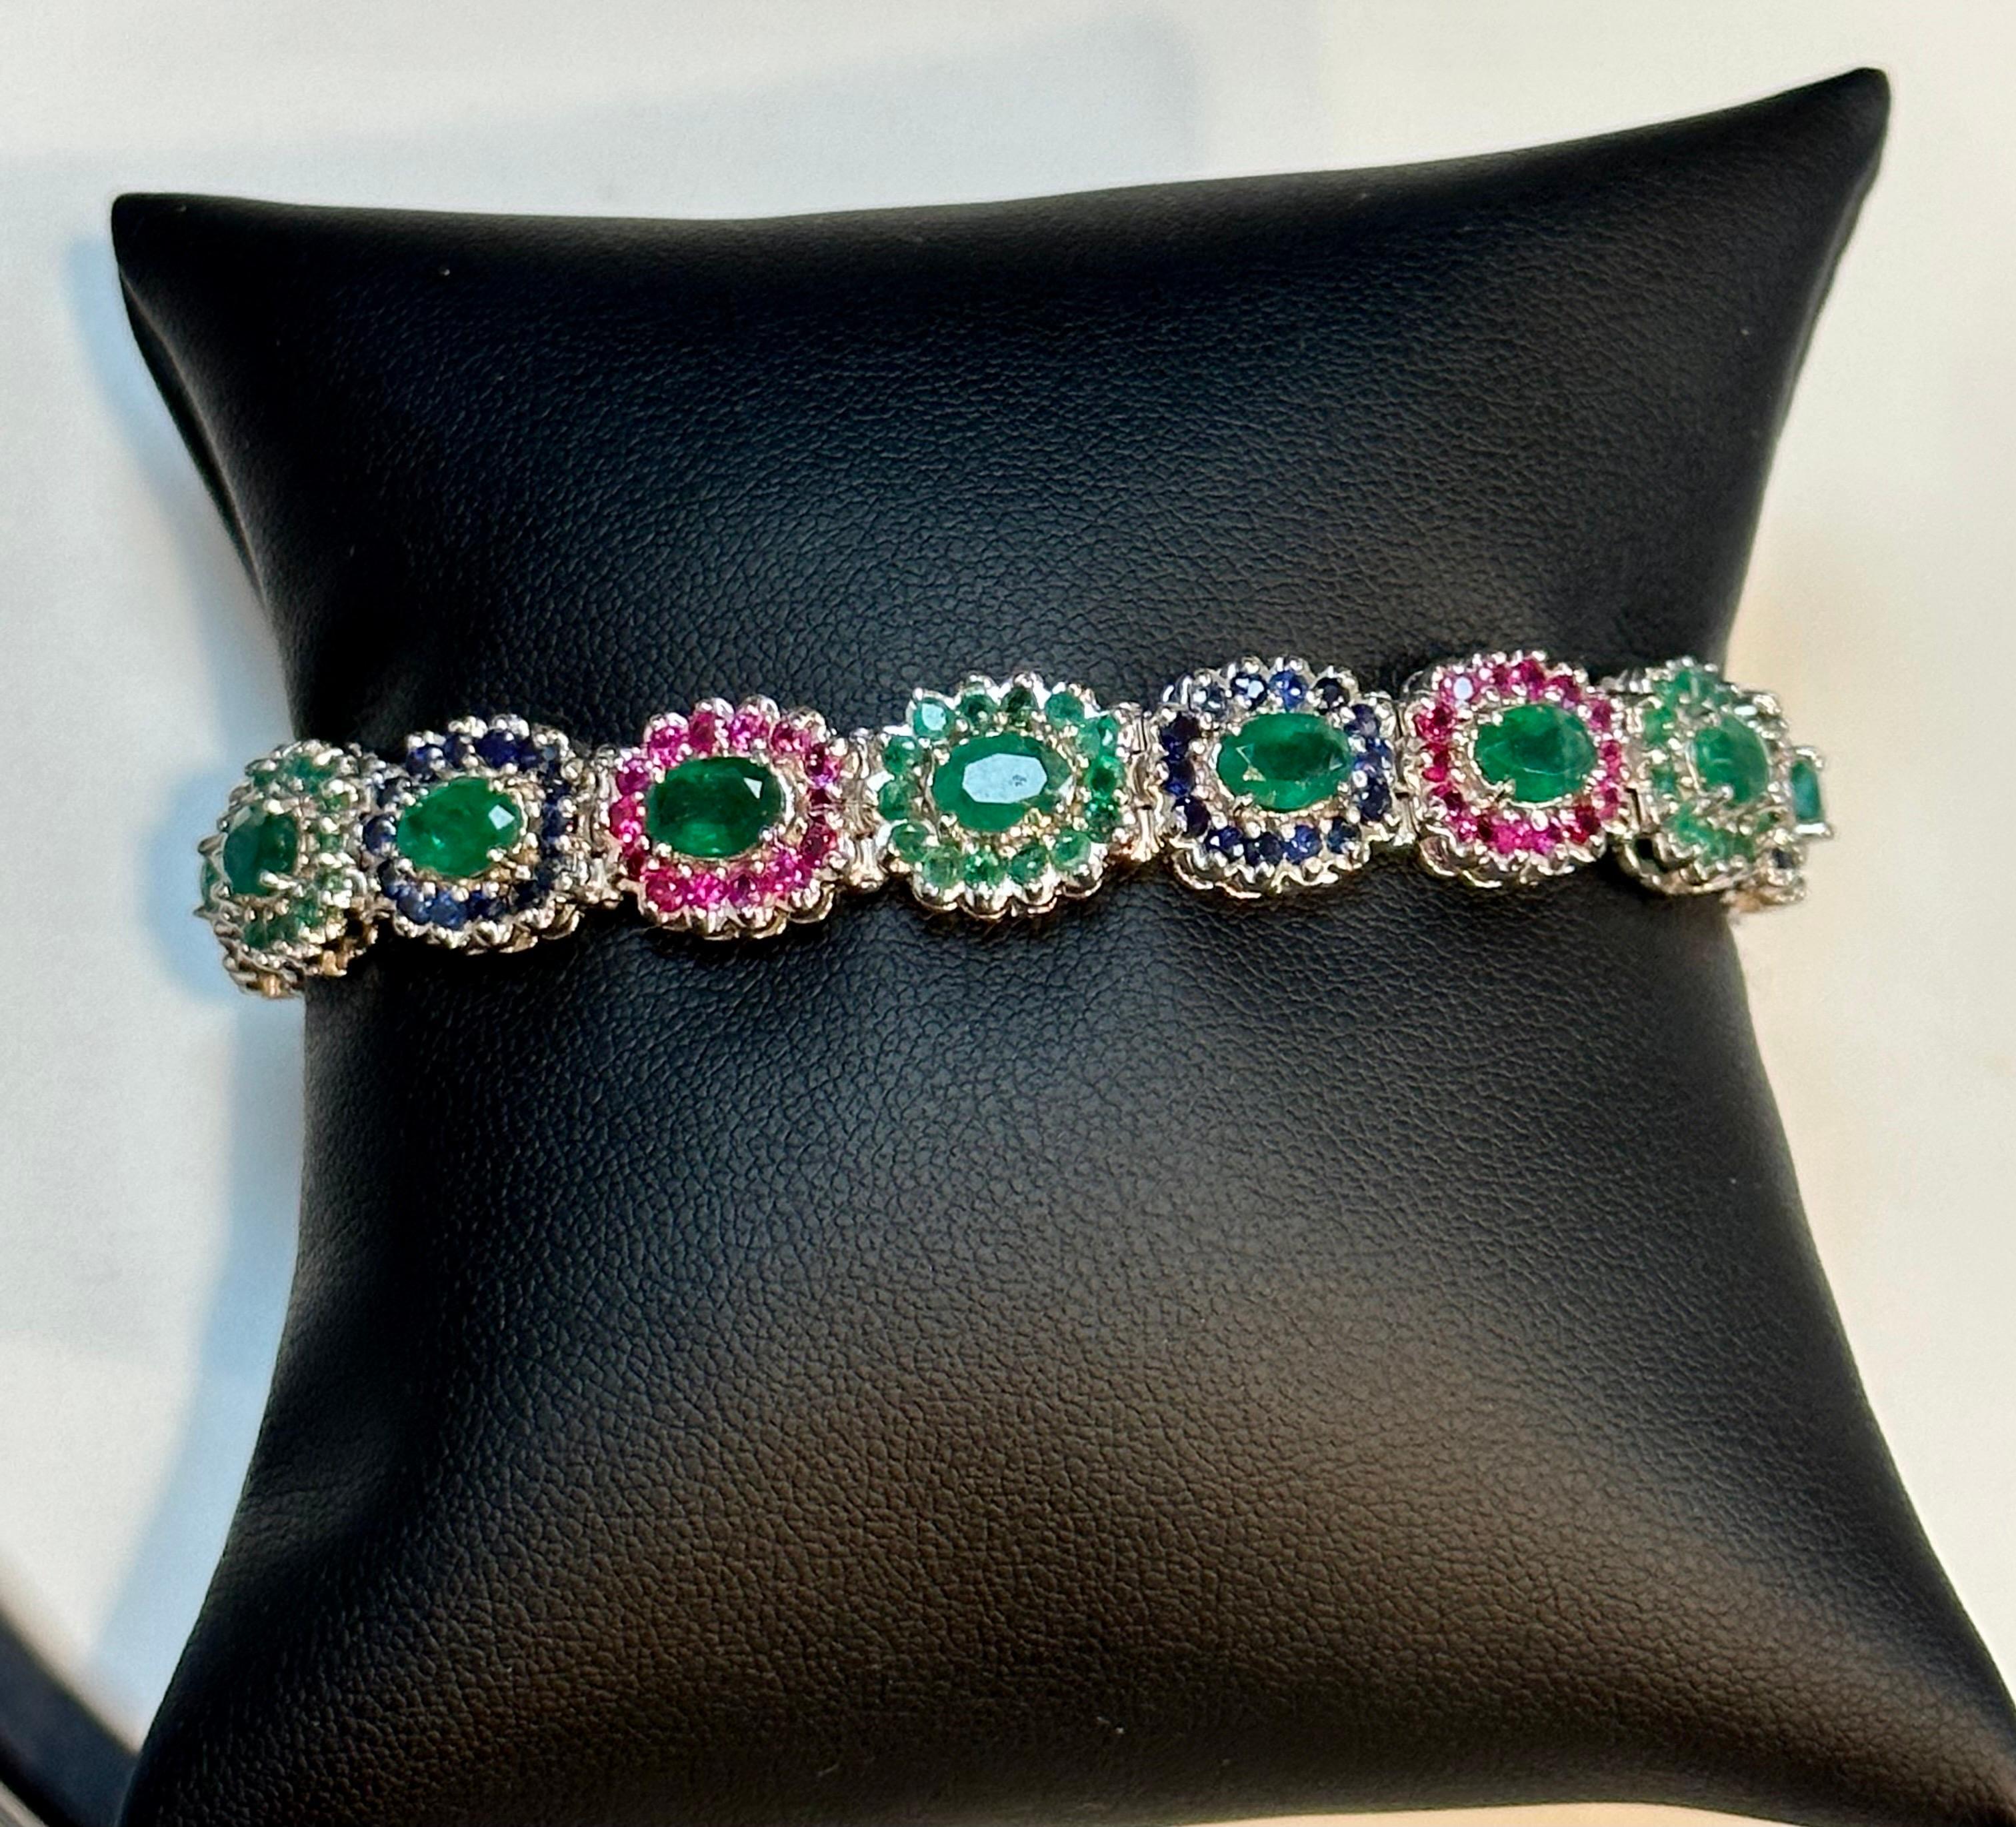 8 Ct Oval Cut Emerald & Ruby & Sapphire Tennis Bracelet 14 Kt White Gold 25.5Gm For Sale 10